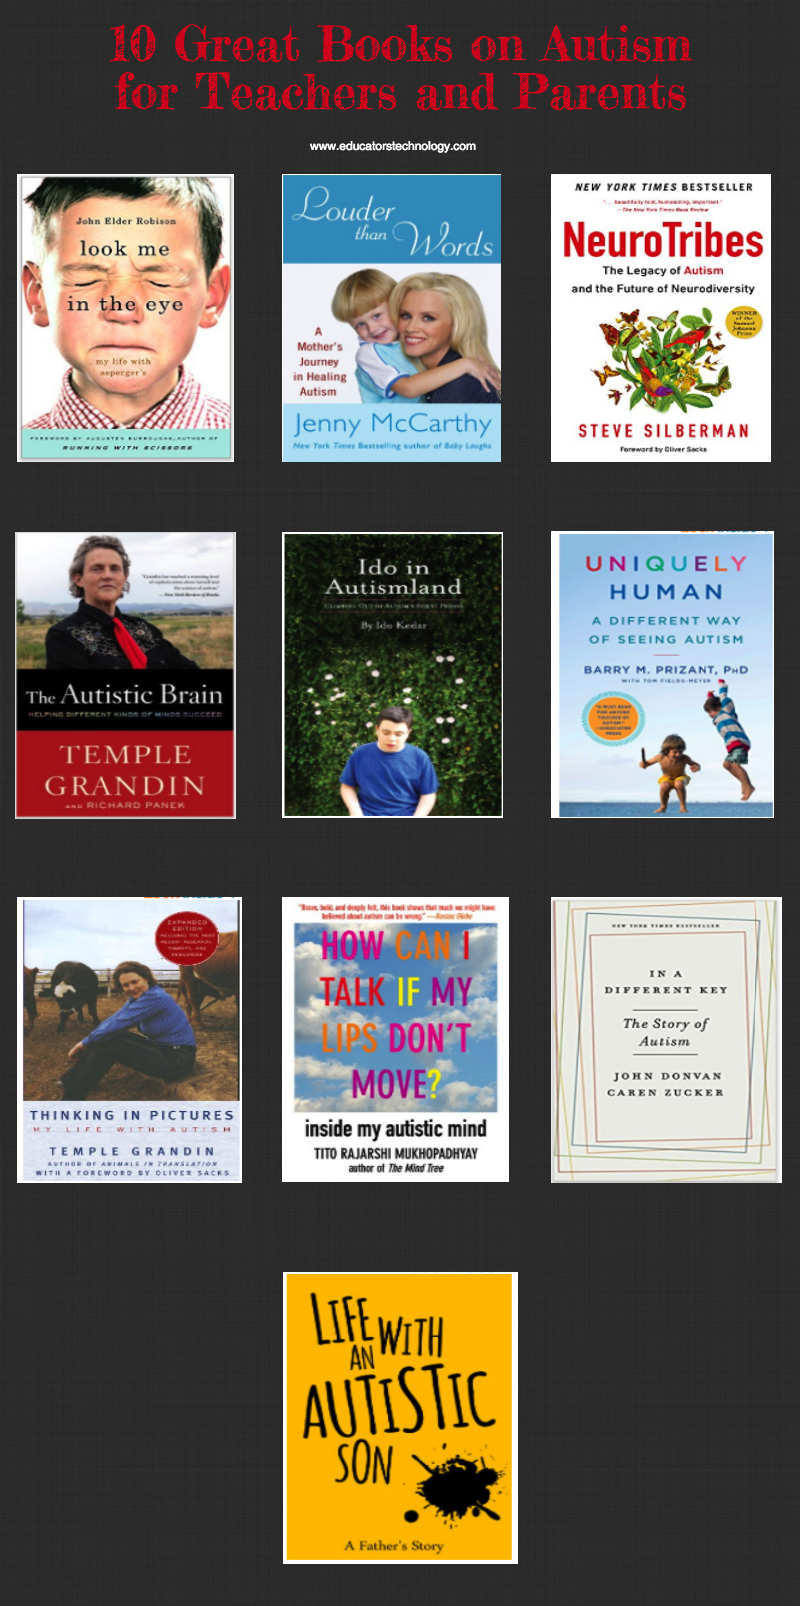 Here is a collection of some pop books on autism Learn And Watch 10 Useful Books on Autism for Teachers